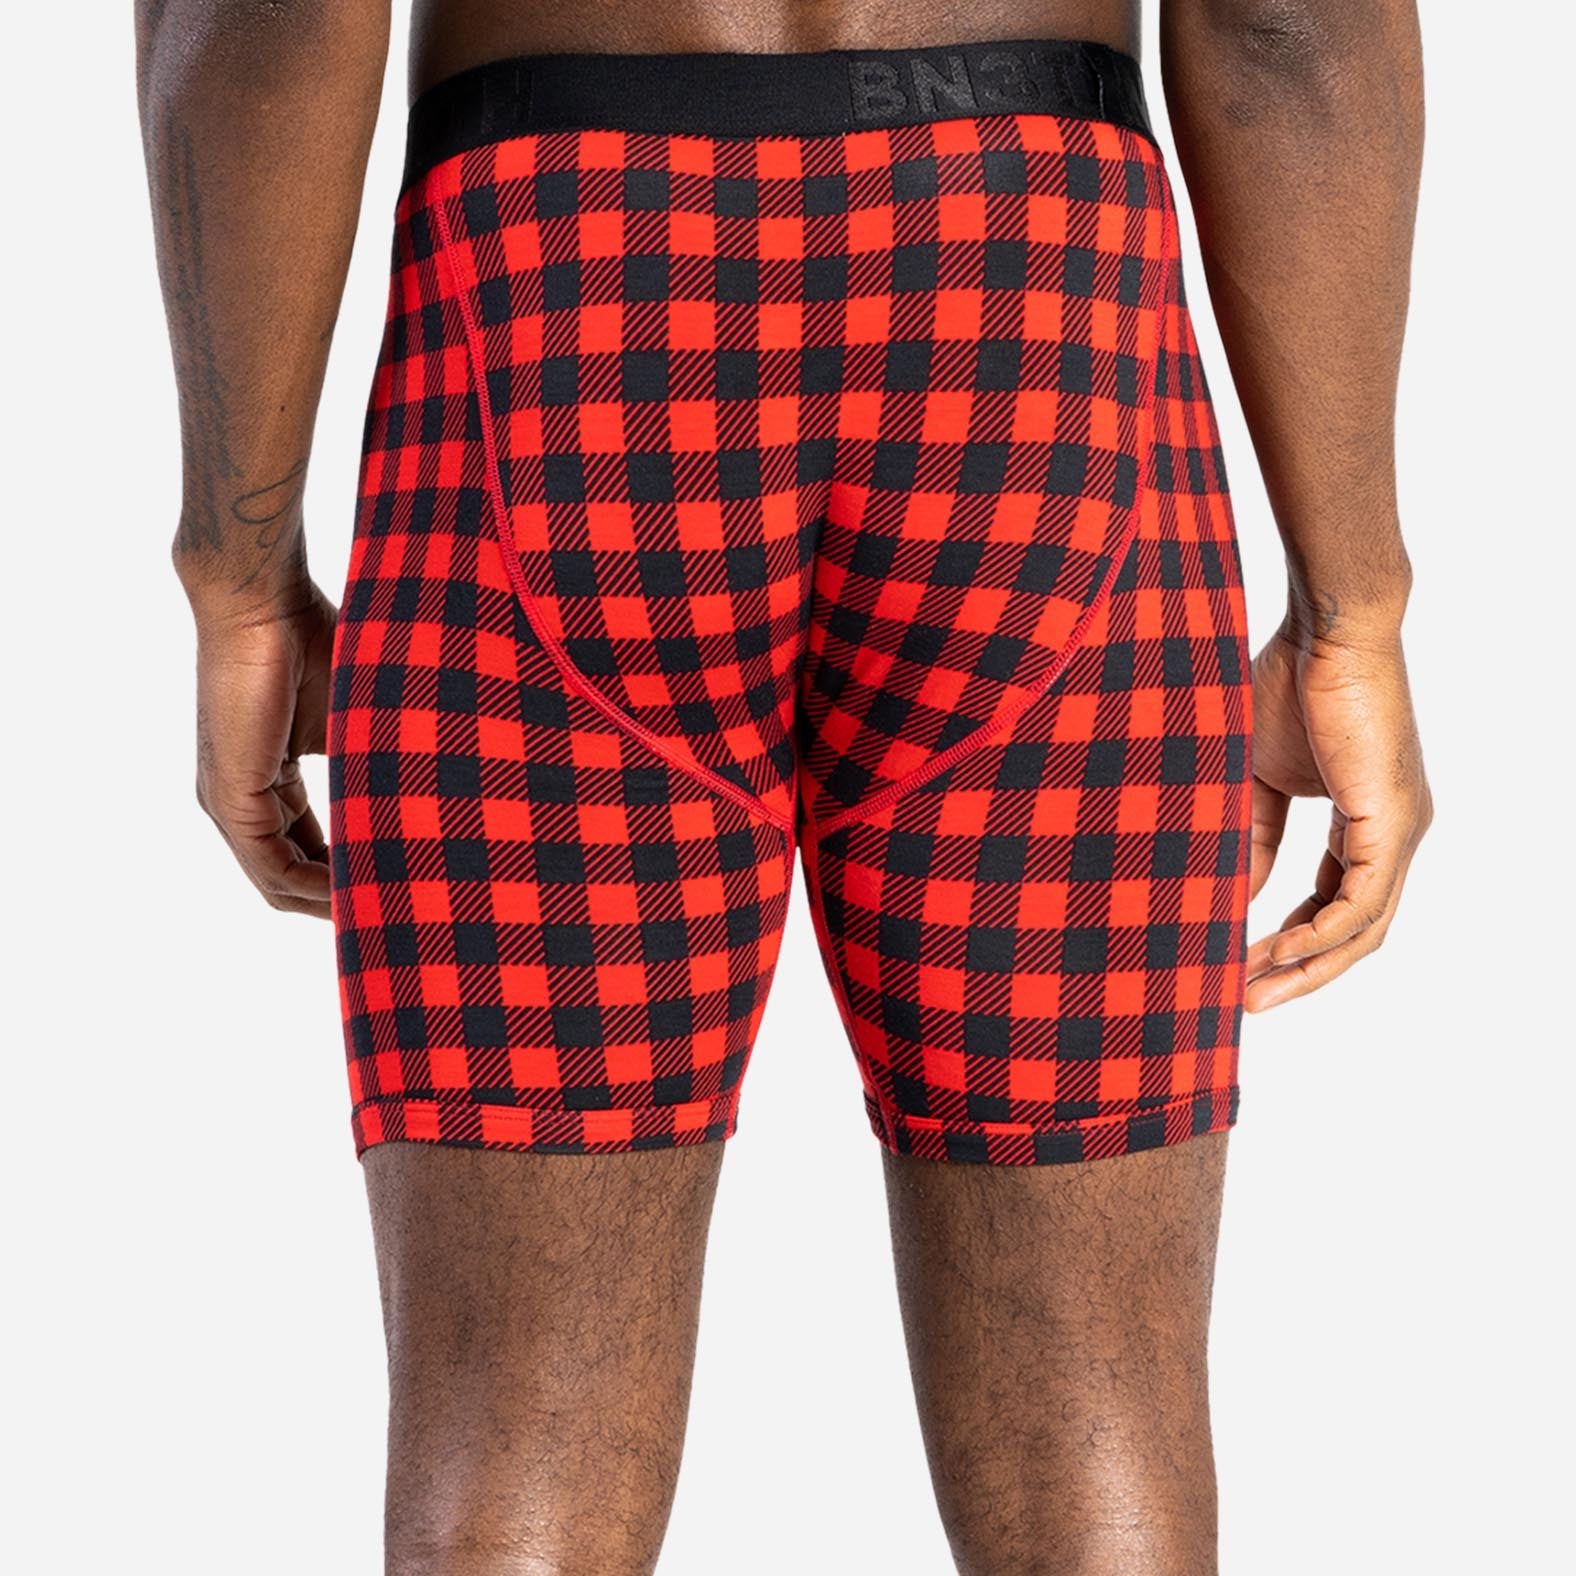 Best Deal in Canada  Paul Frank Women s Boxer Briefs - Canada's best deals  on Electronics, TVs, Unlocked Cell Phones, Macbooks, Laptops, Kitchen  Appliances, Toys, Bed and Bathroom products, Heaters, Humidifiers